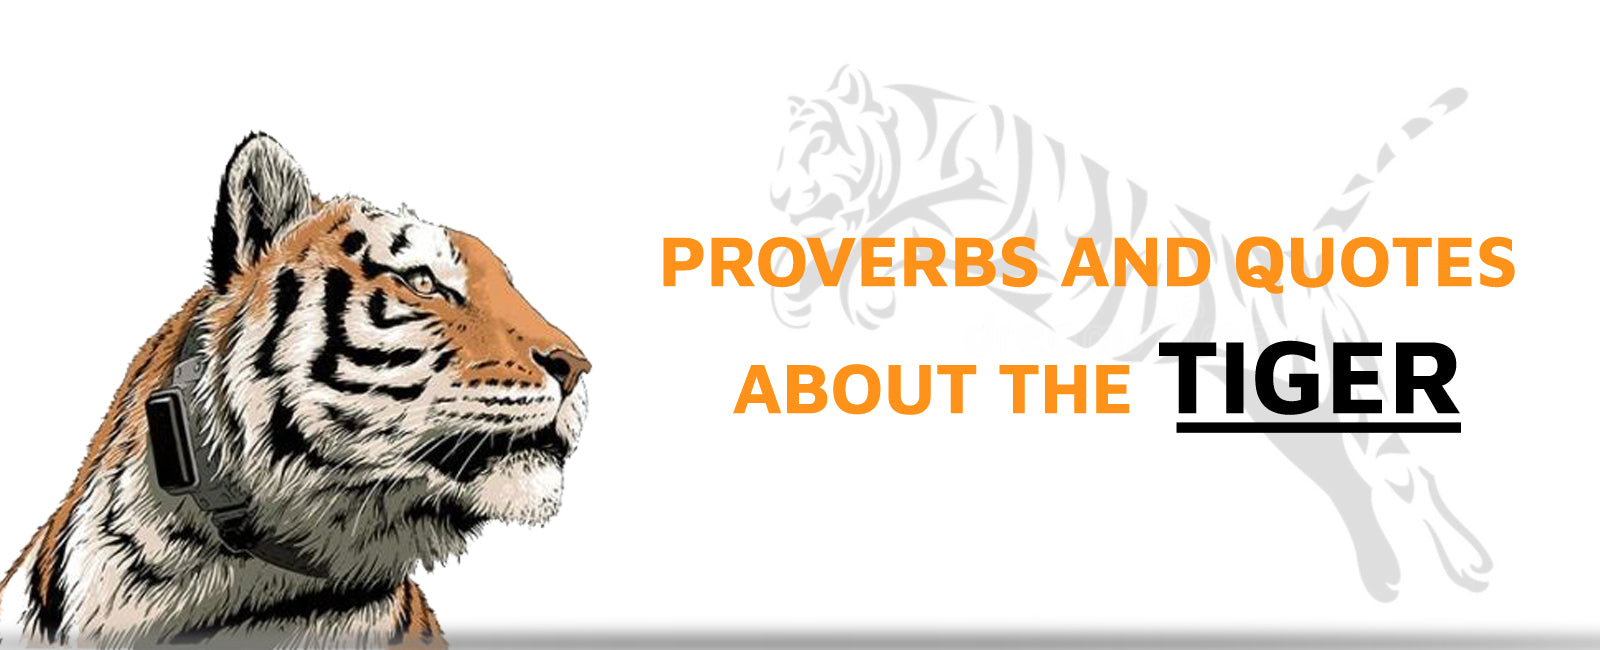 Proverbs and Quotes about the Tiger